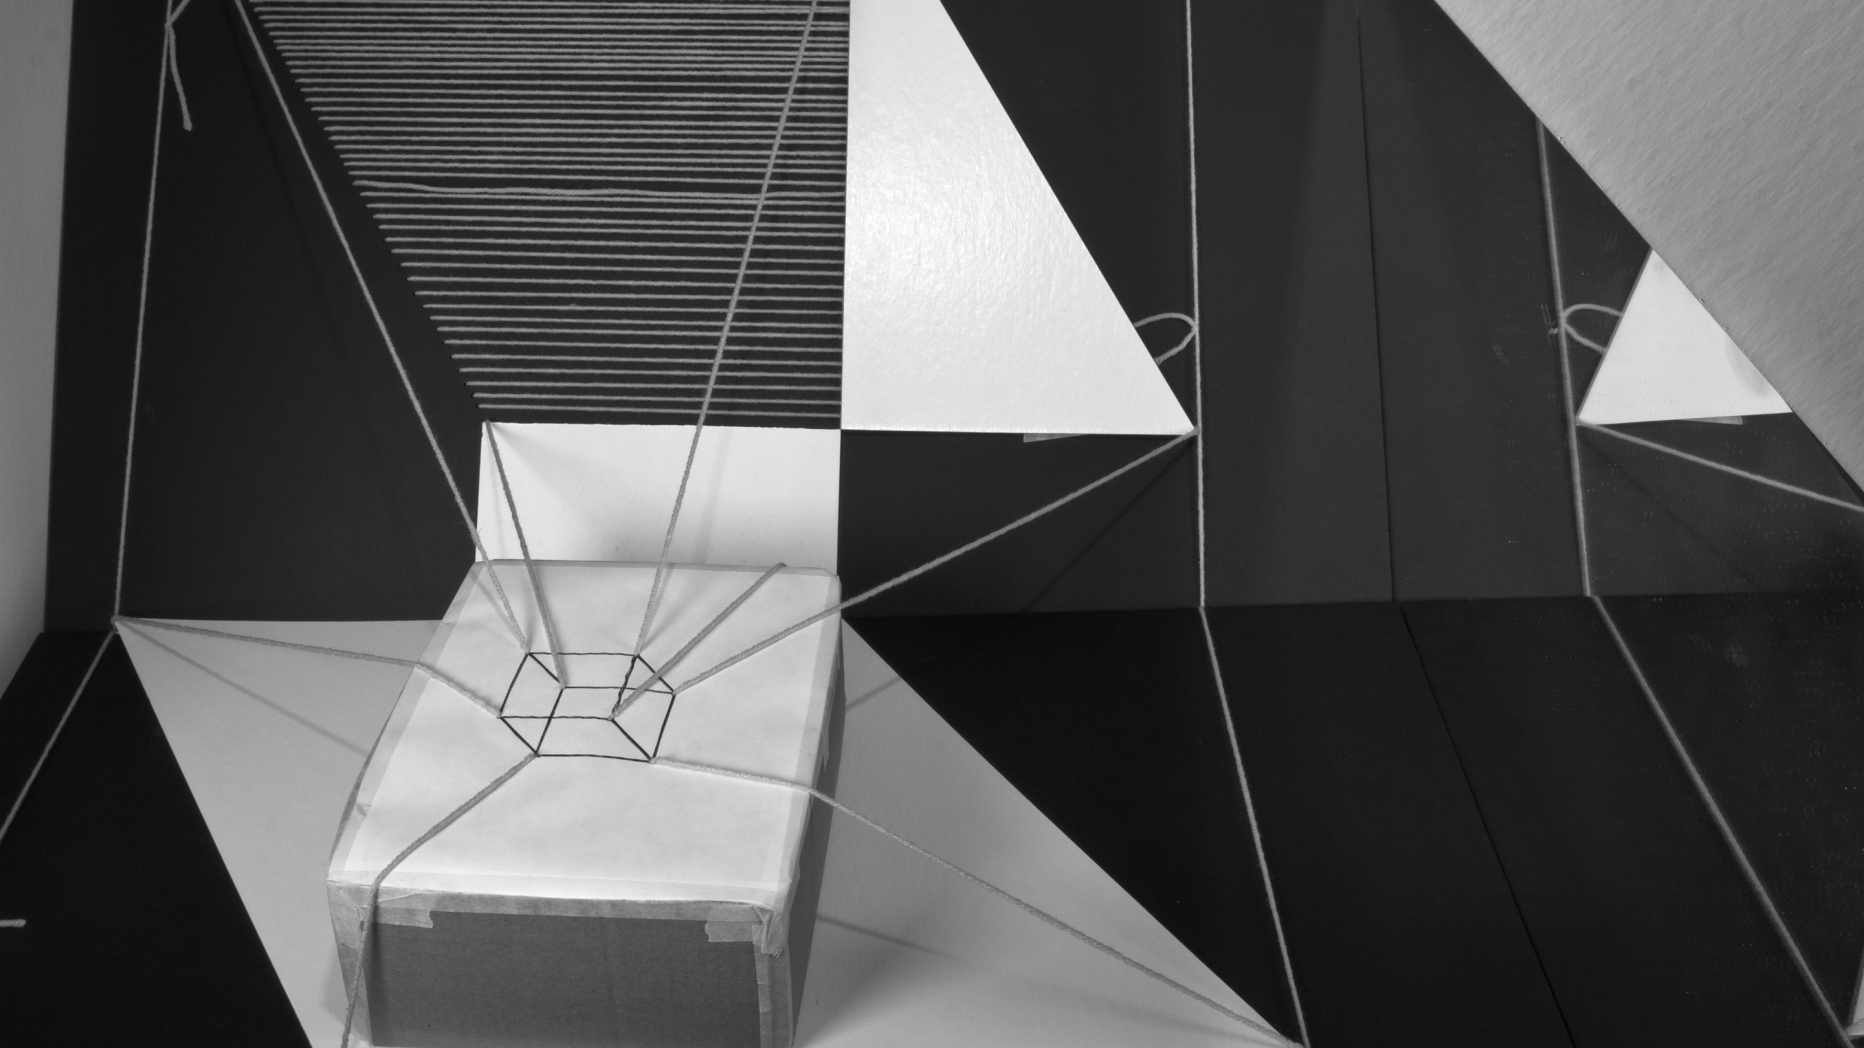 Photograph of sculpture featuring different lines and shades of black white and grey that confuse the eye of the viewer.